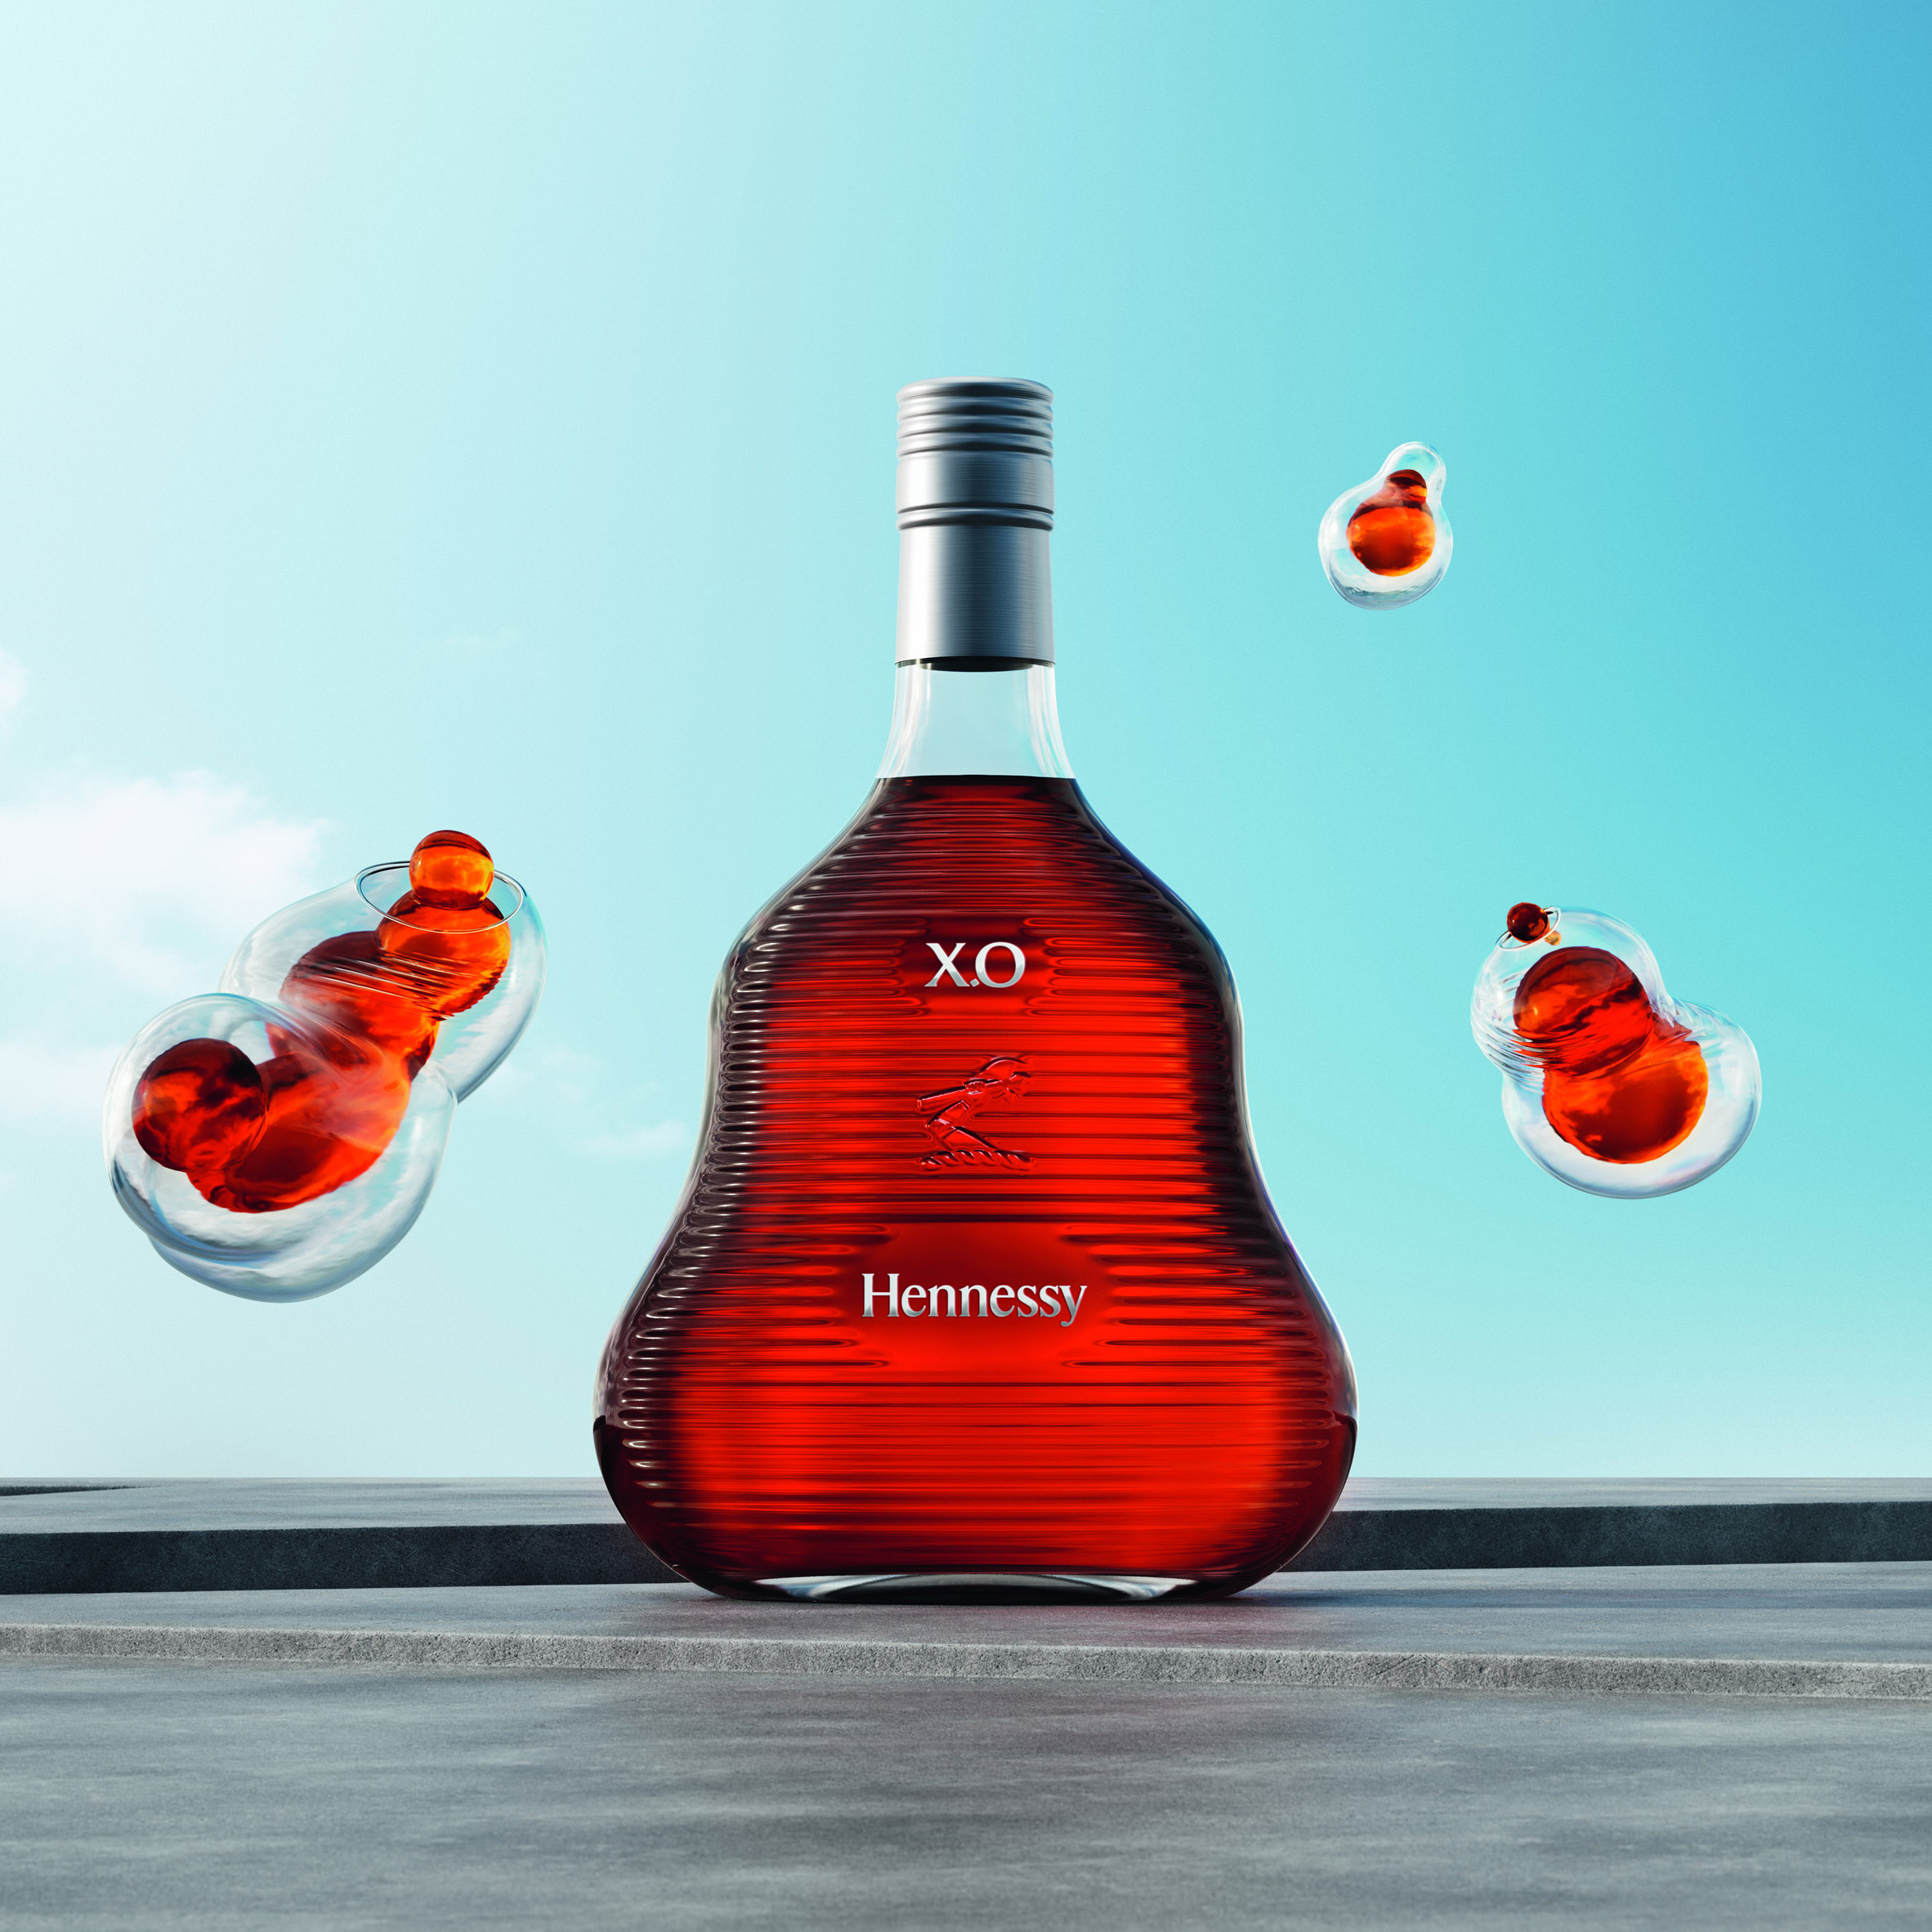 Marc Newson designs limited-edition cognac bottle for Hennessy